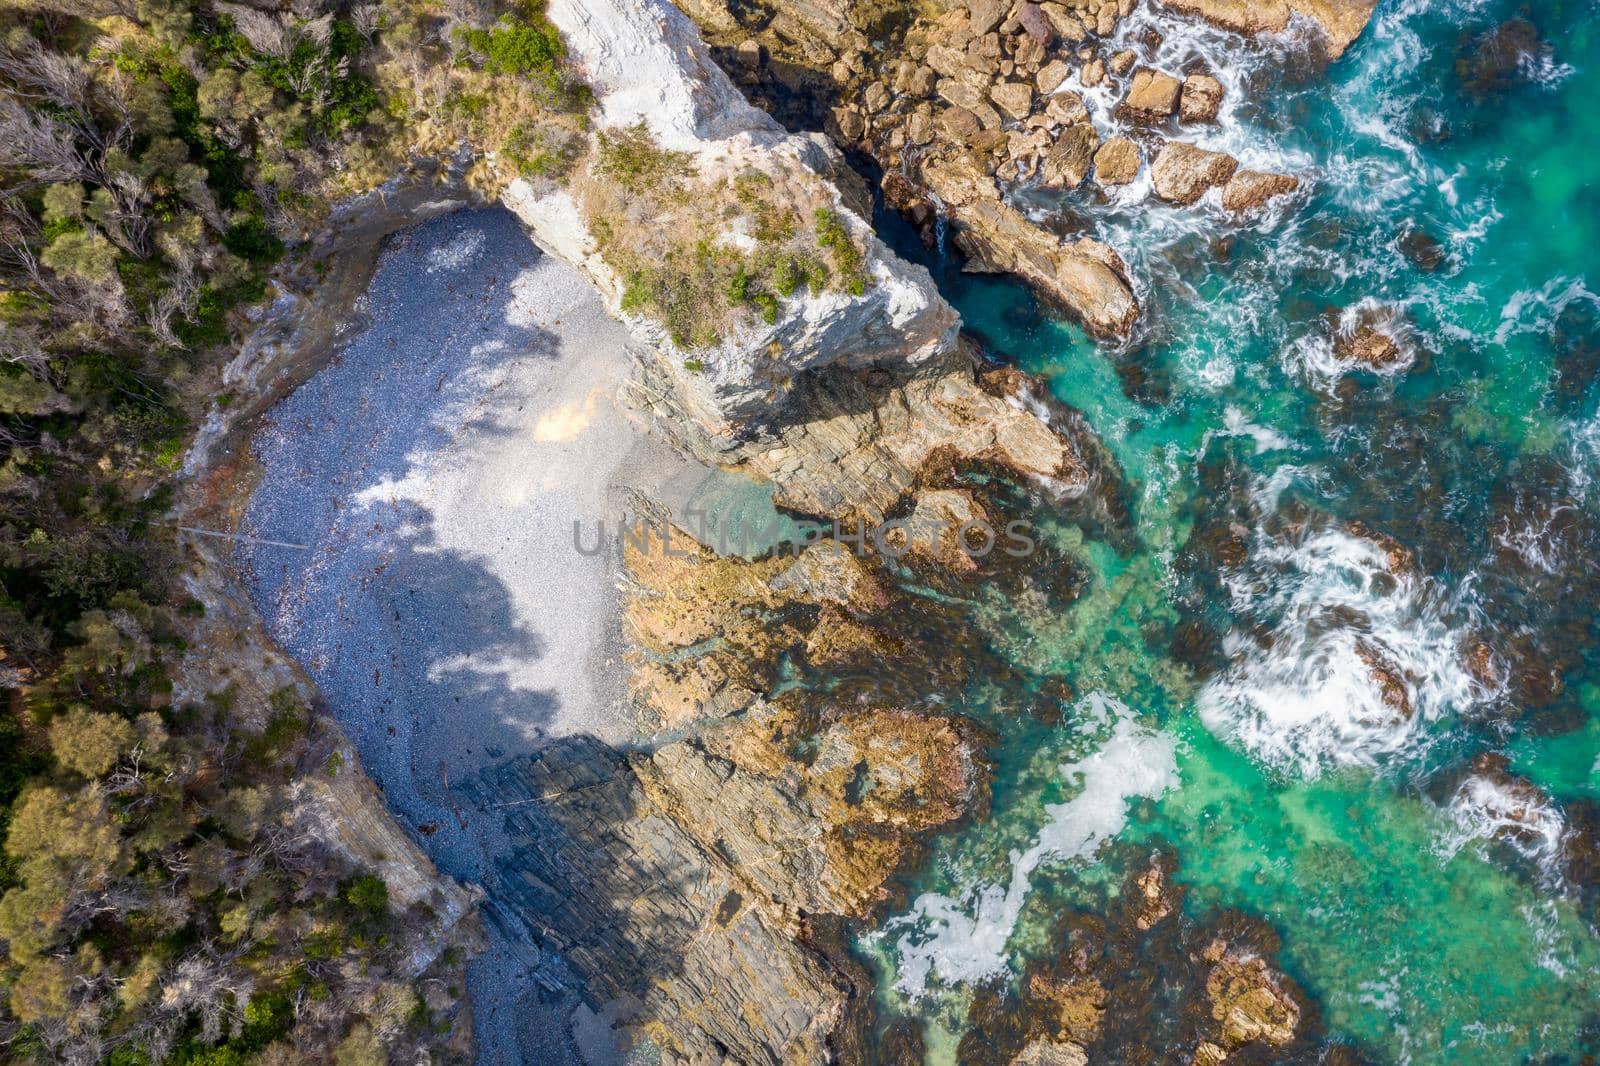 Aerial coastal views of rocky inlets, caves and hidden beaches